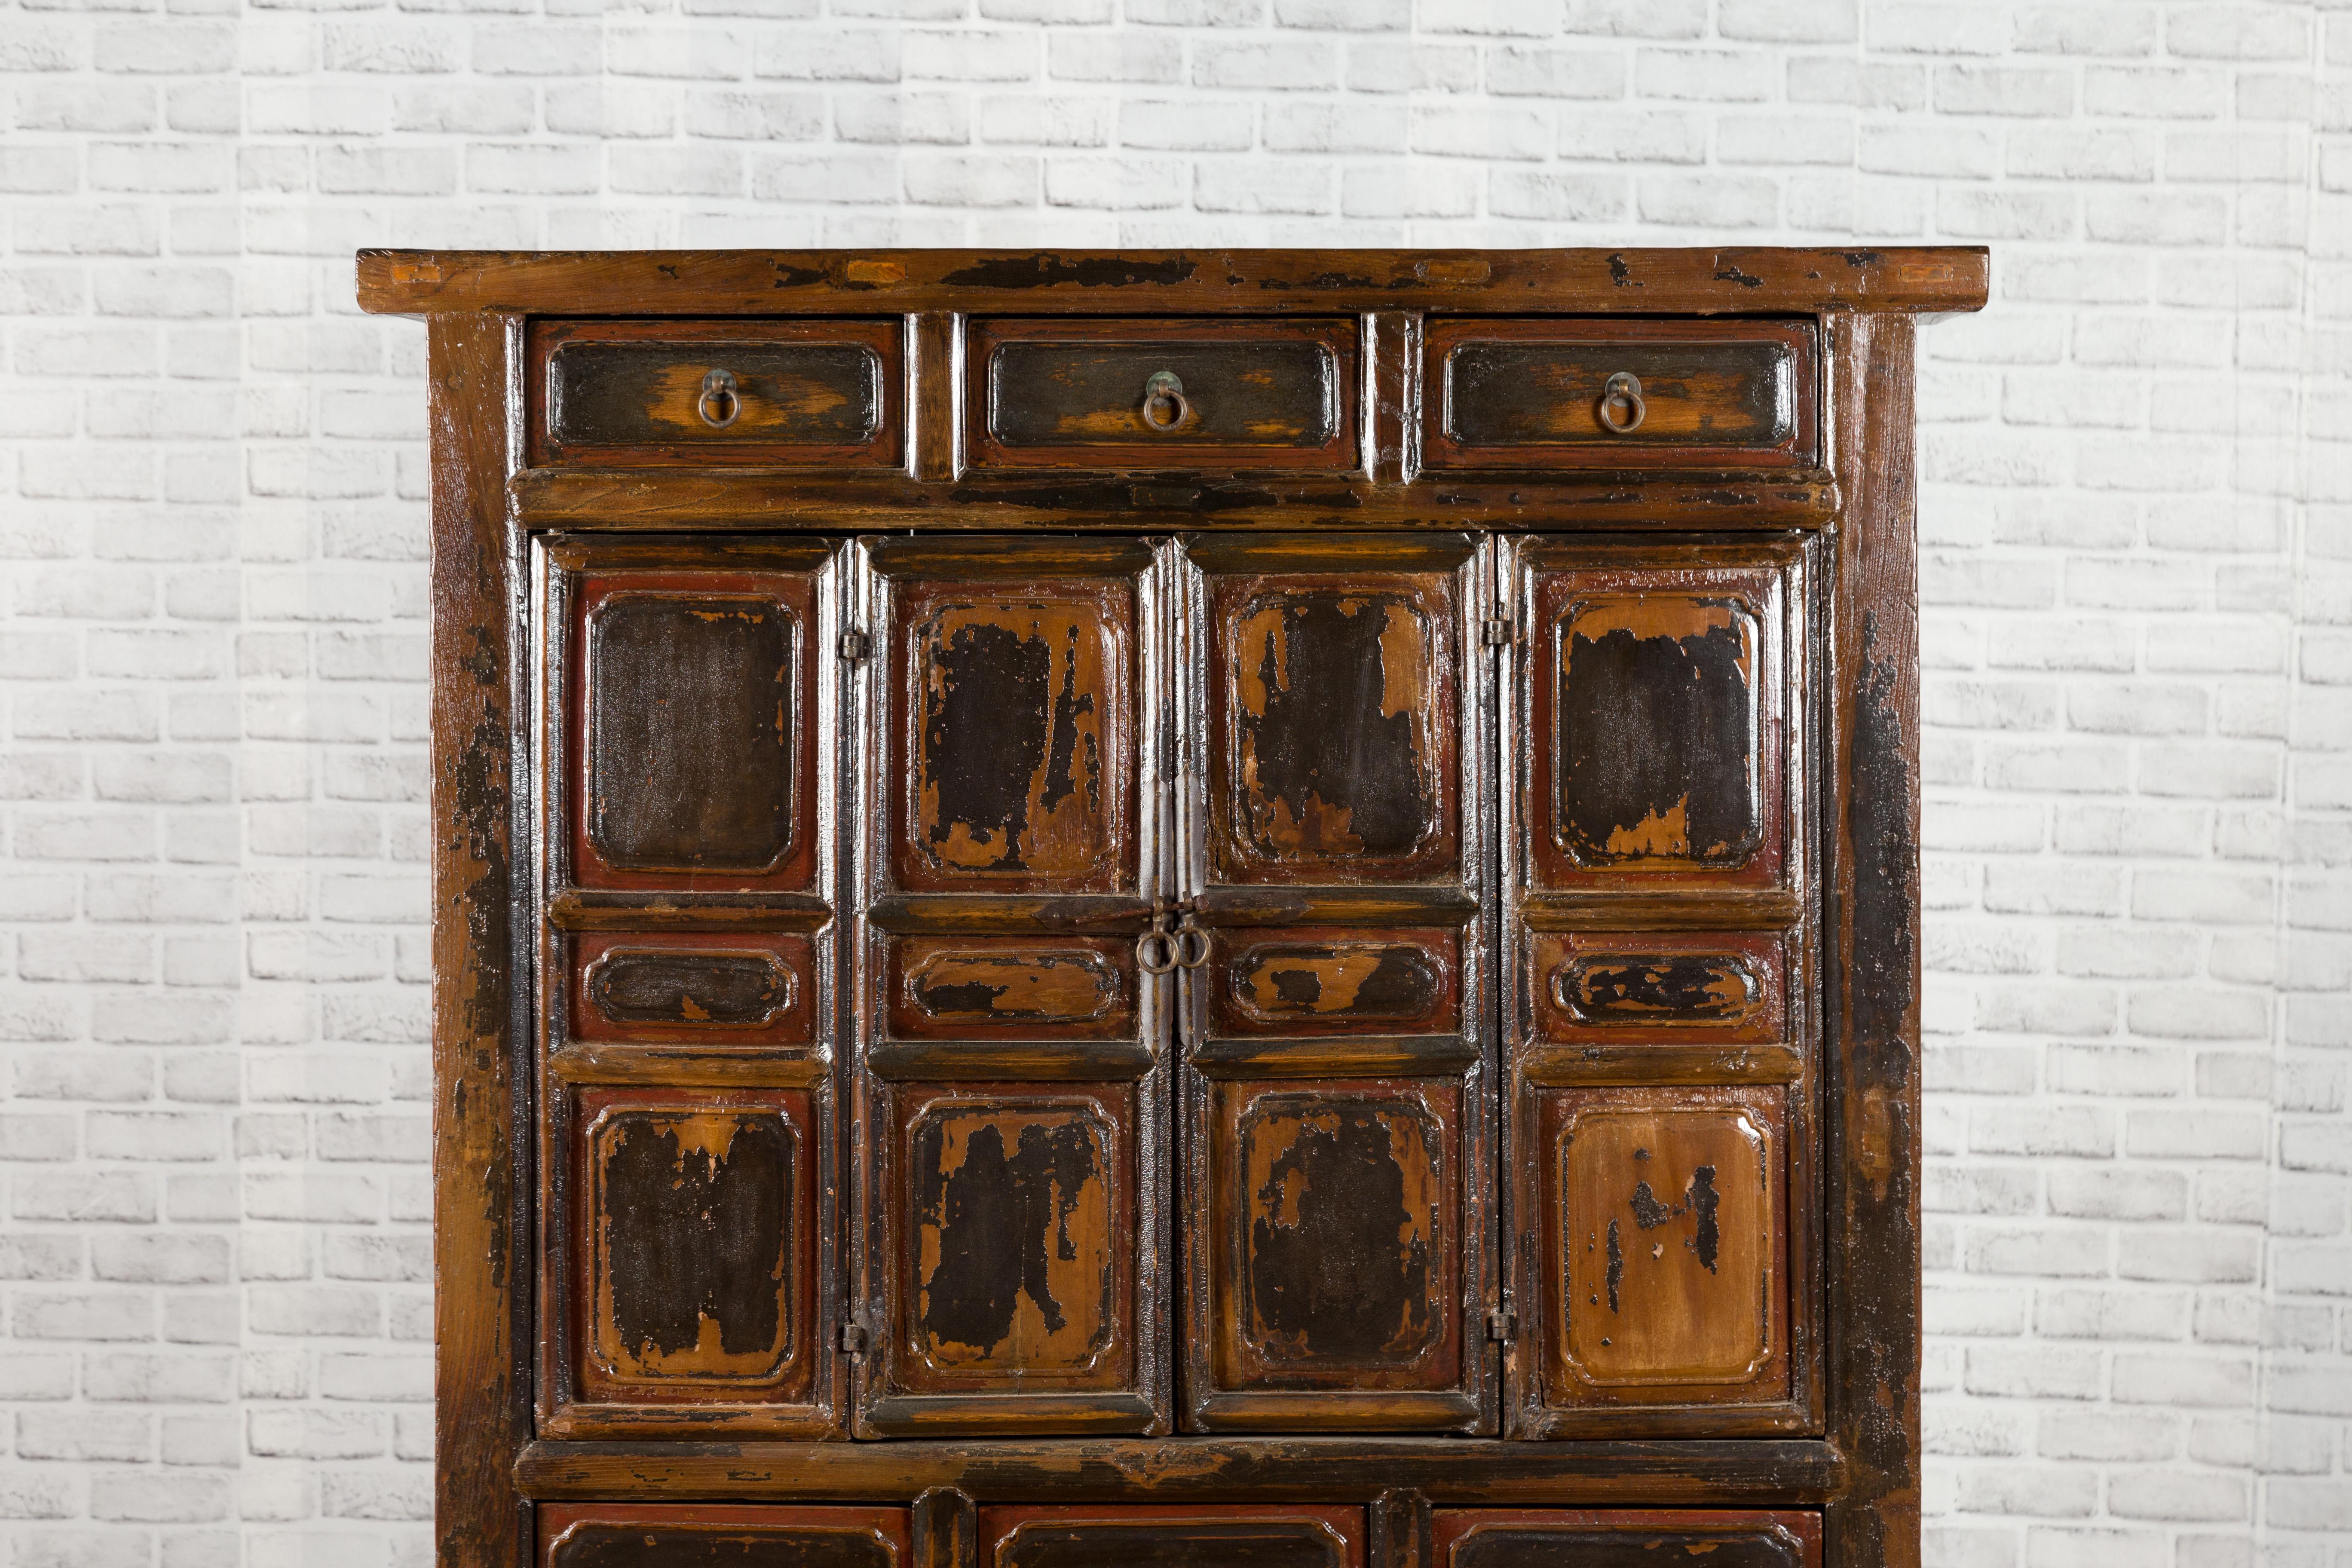 Chinese Qing Mid-19th Century Cabinet with Distressed Patina, Doors and Drawers In Good Condition For Sale In Yonkers, NY